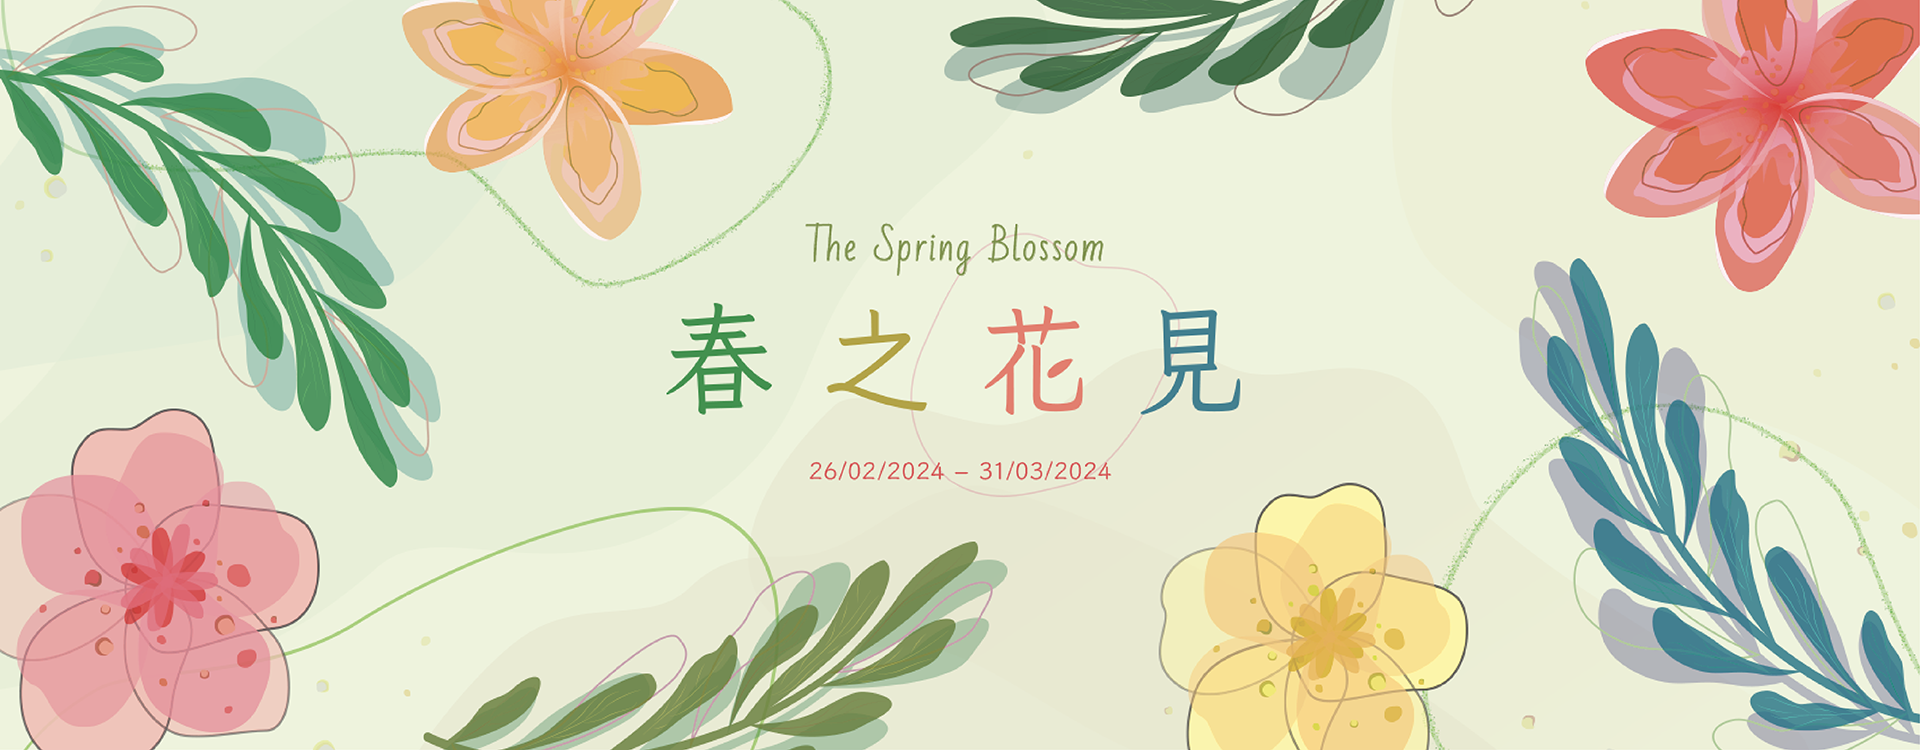 TheSpringBlossom_banner.png